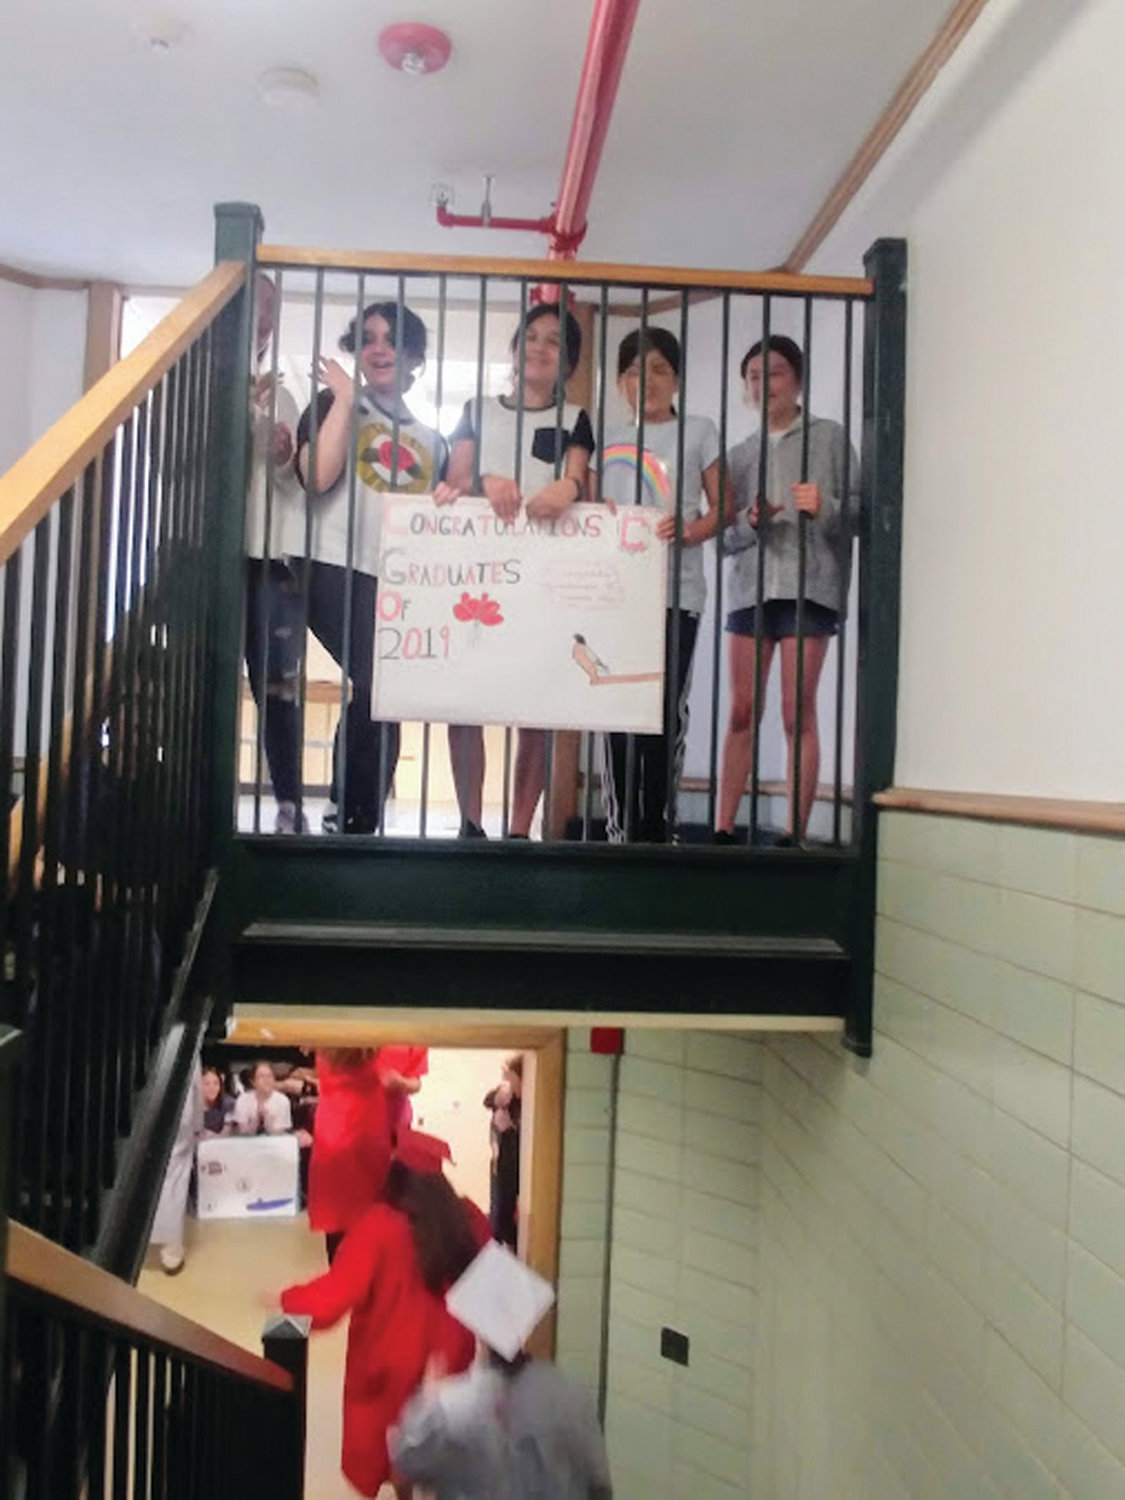 WAITING FOR A GLIMPSE: The students at Oaklawn Elementary School await the seniors’ visit, holding special congratulatory posters and signs as they pass by.